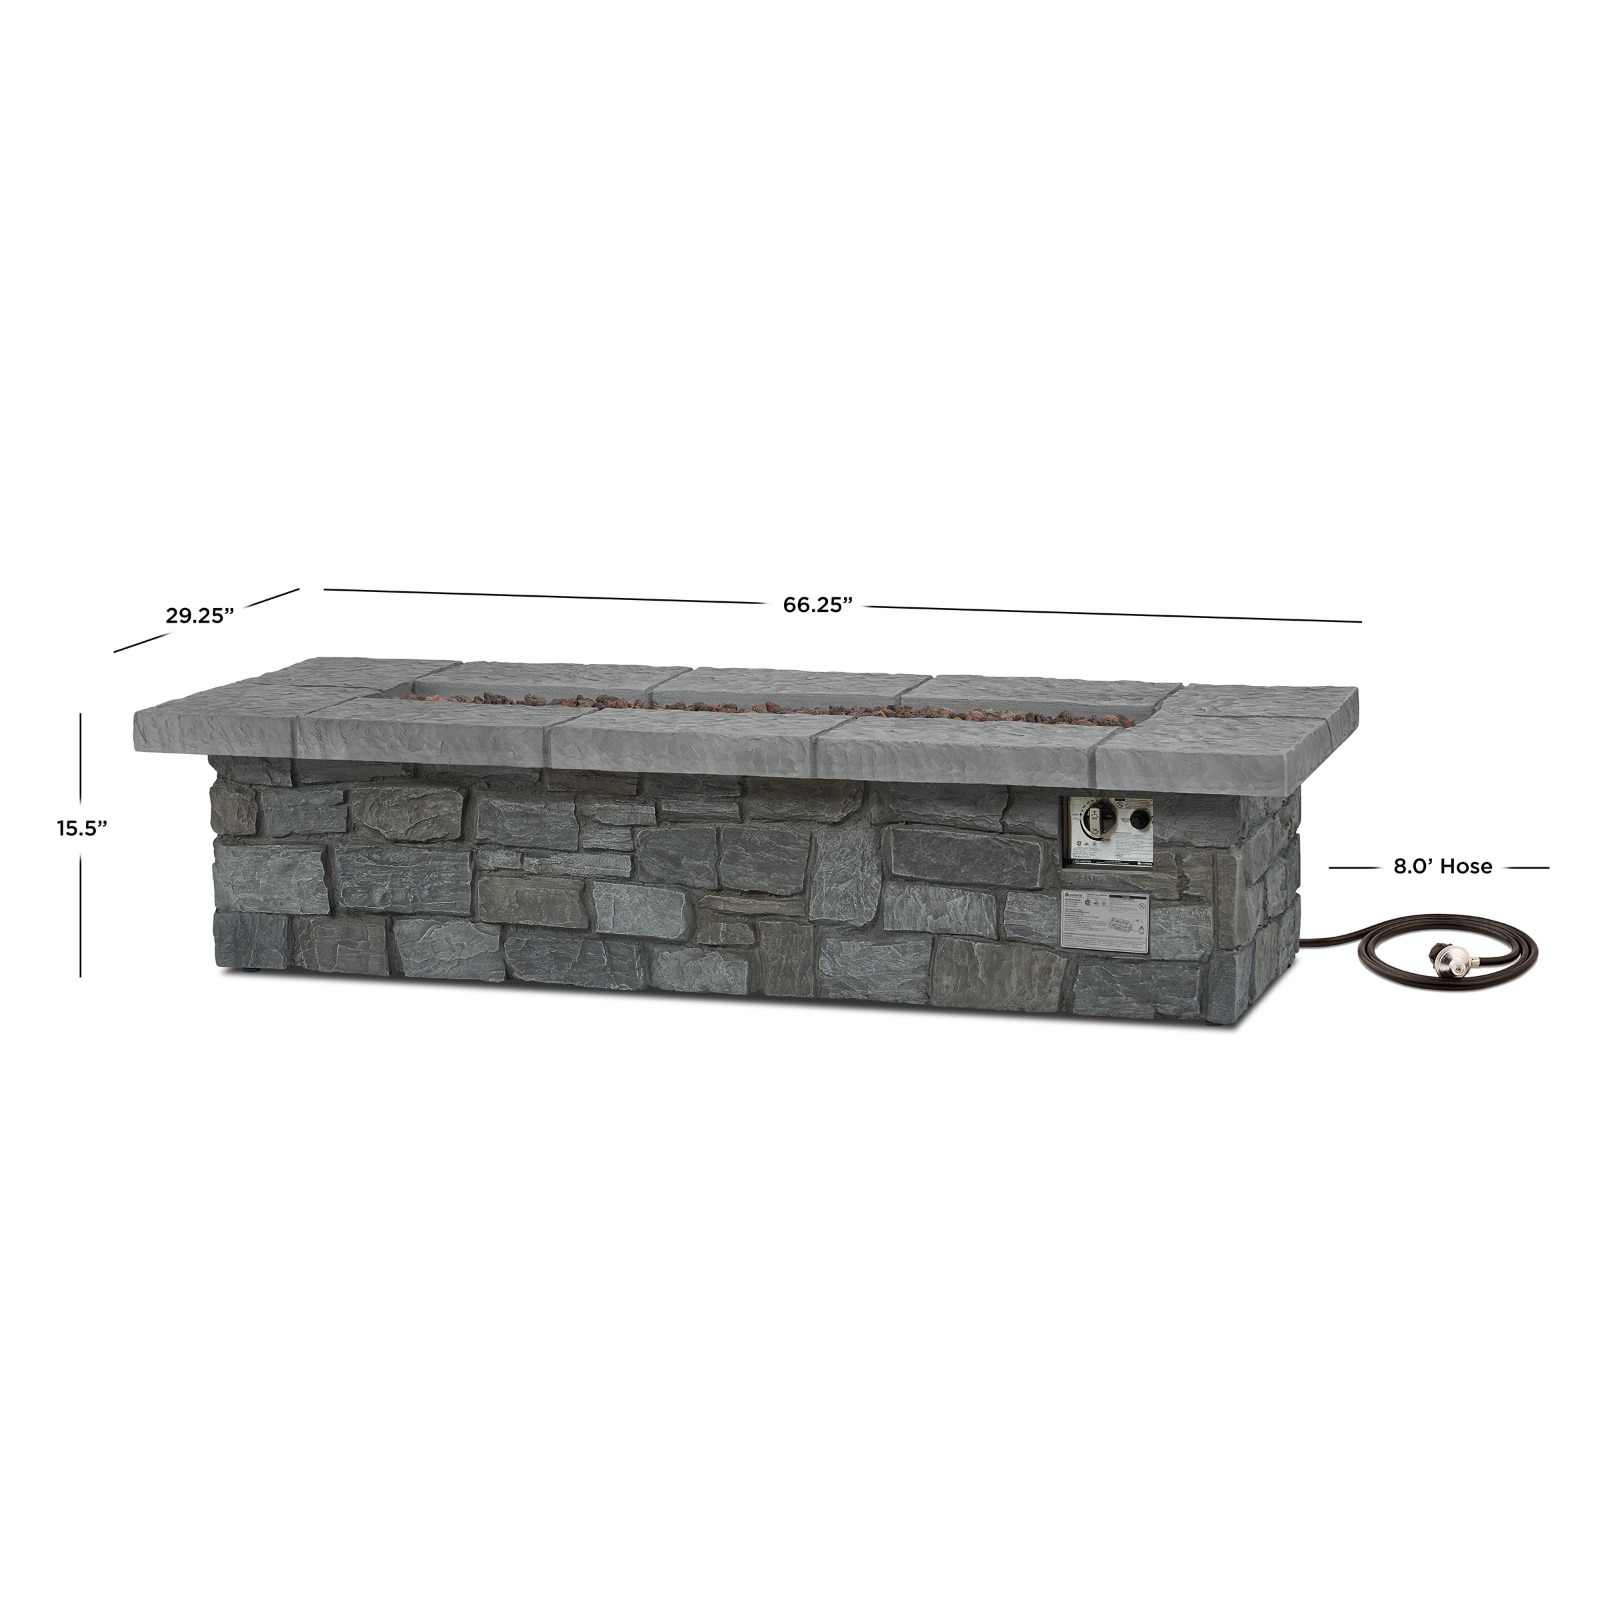 Sedona 66" Rectangle Propane Fire Pit Outdoor Fireplace Fire Table for Backyard or Patio Dimensions